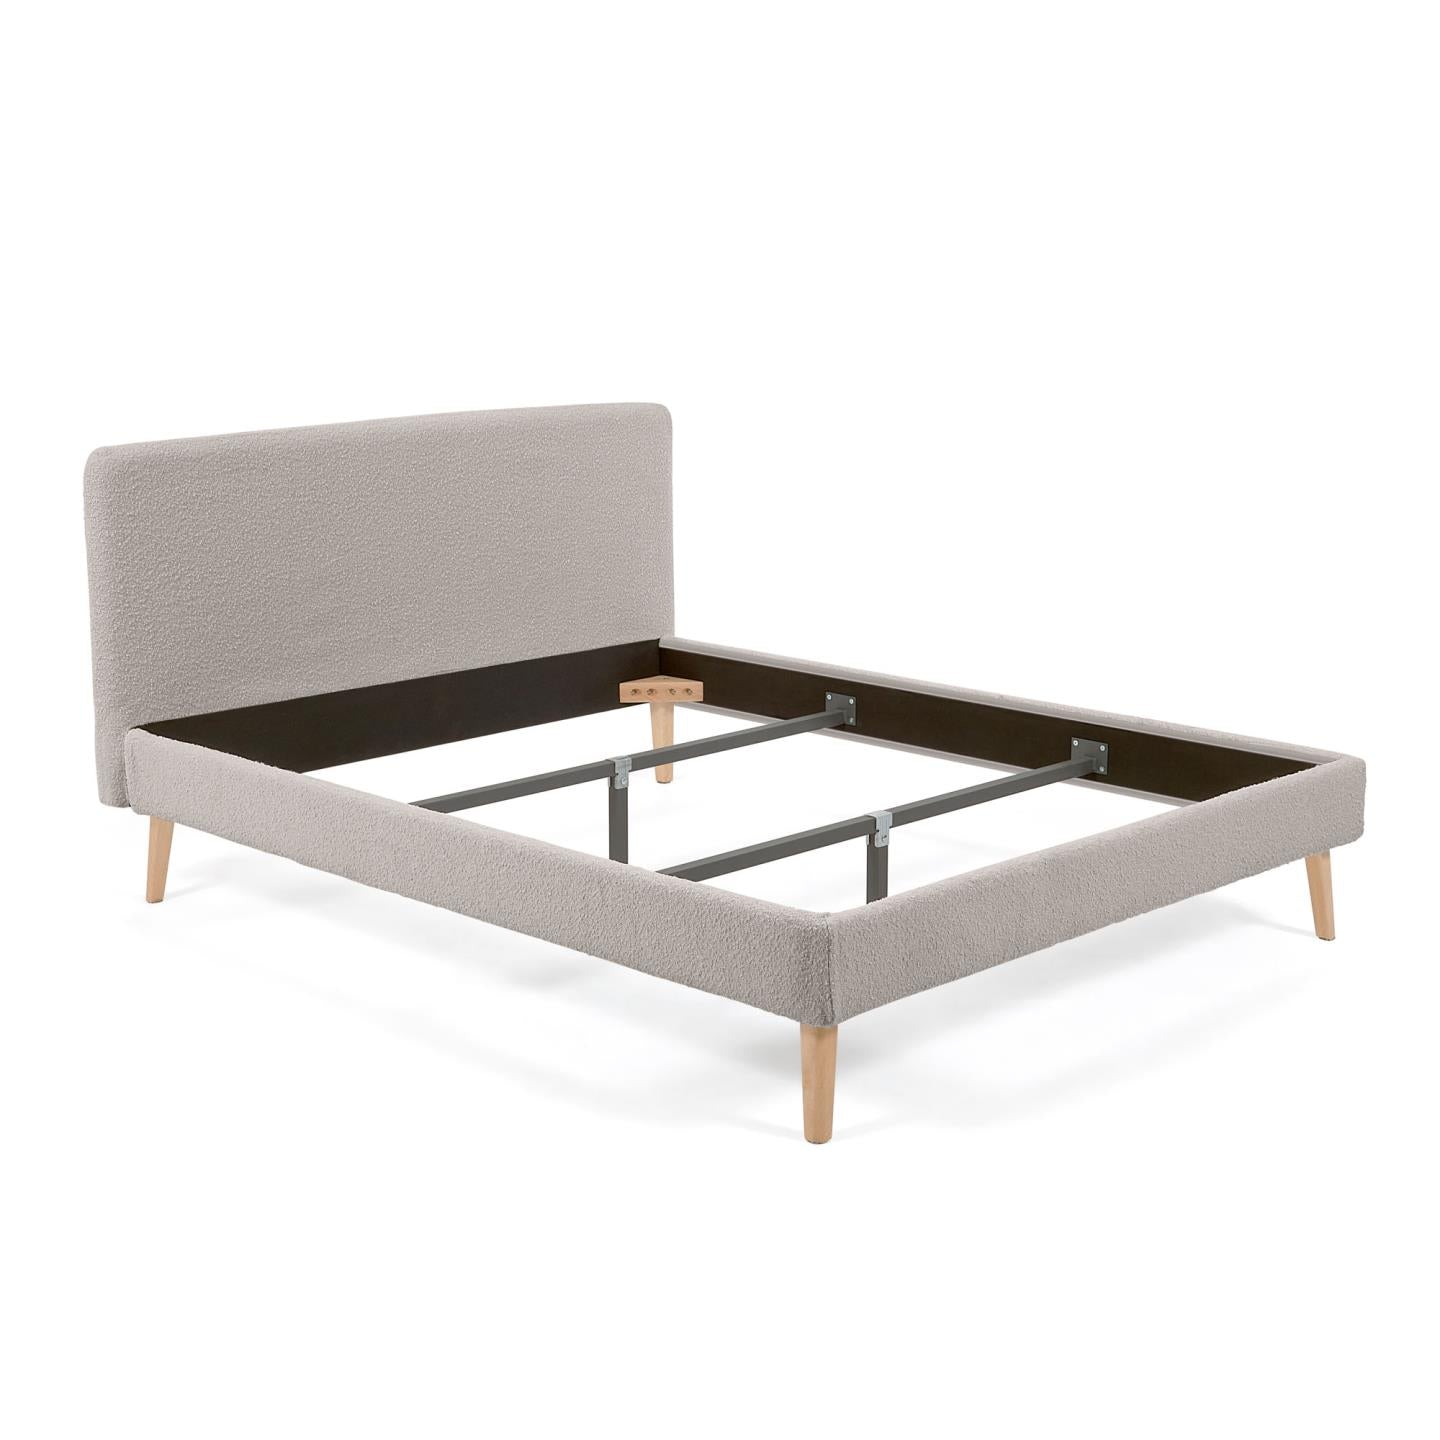 Dyla bed in light grey fleece, with solid beech wood legs for a 160 x 200 cm mattress